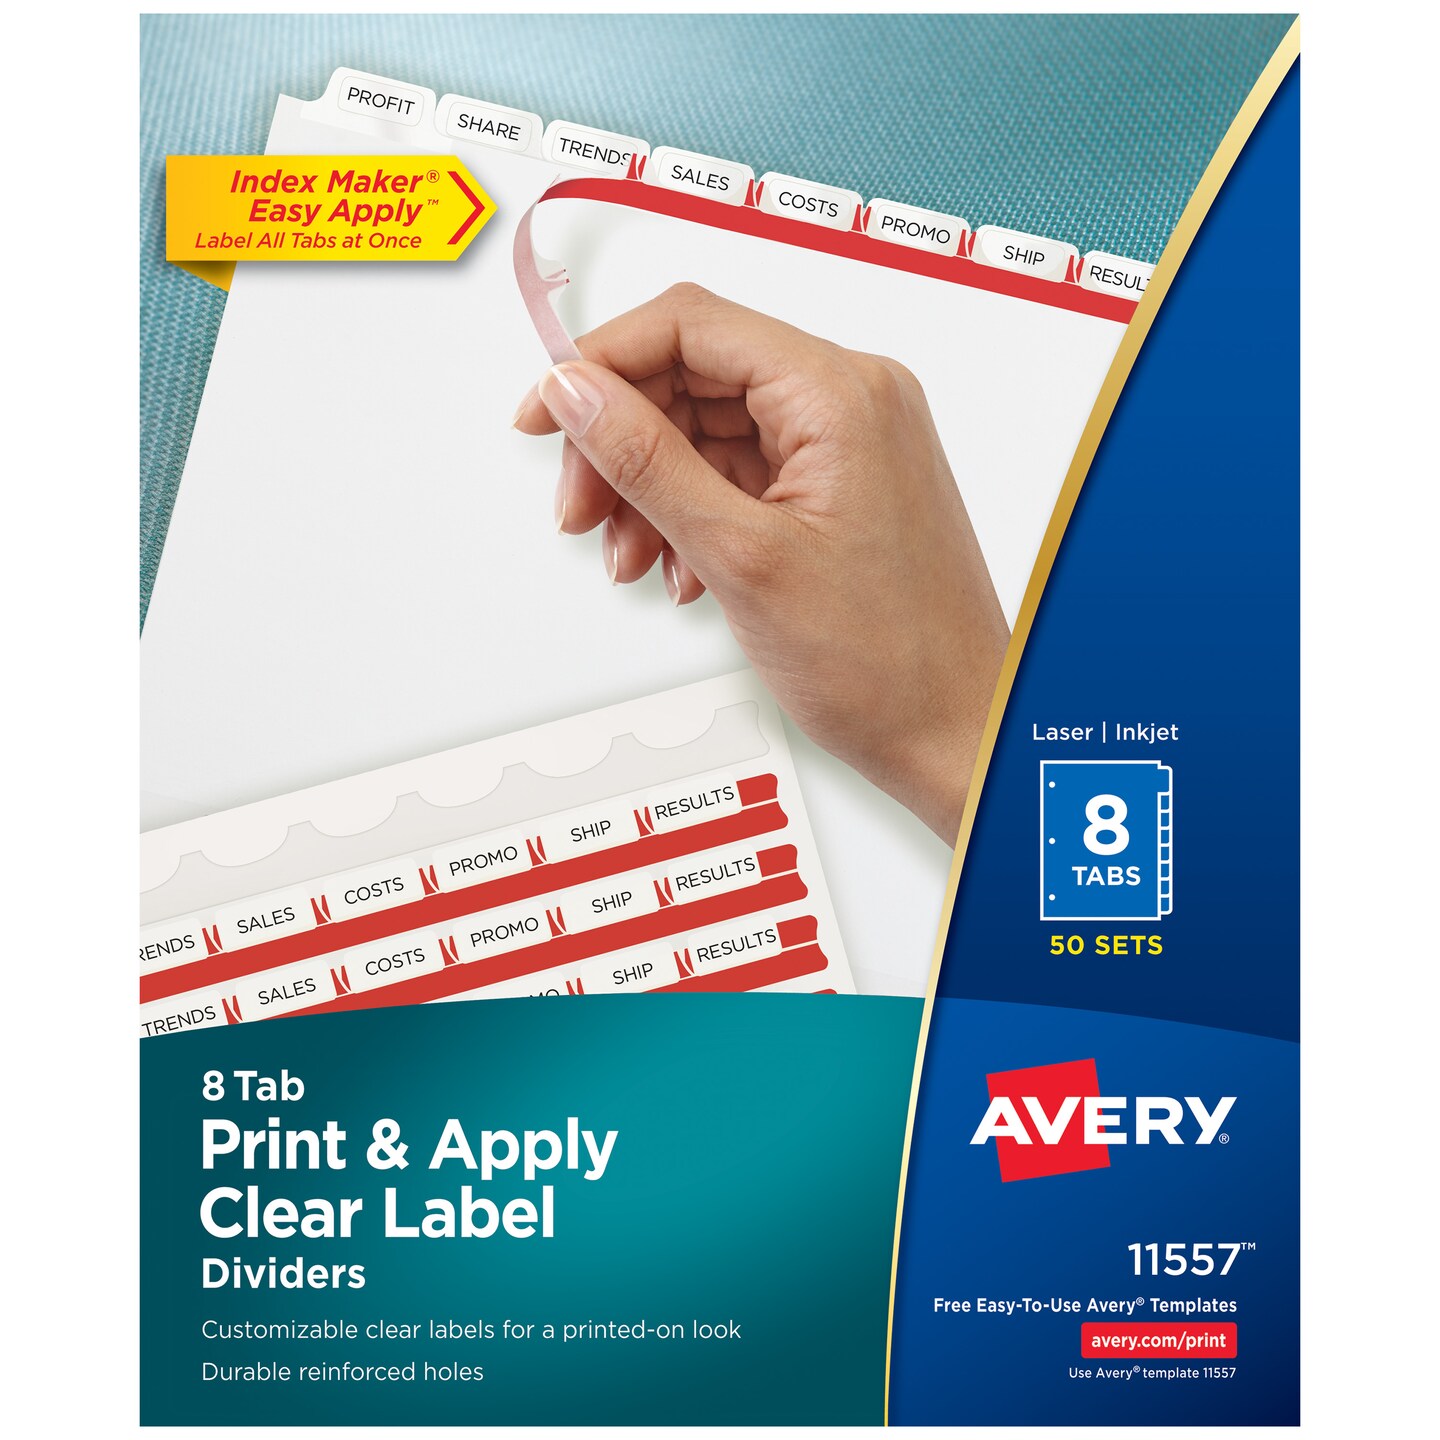 Avery 8 Tab Dividers for 3 Ring Binder, Easy Print &#x26; Apply Clear Label Strip, Index Maker Customizable White Tabs, 50 Sets (11557)